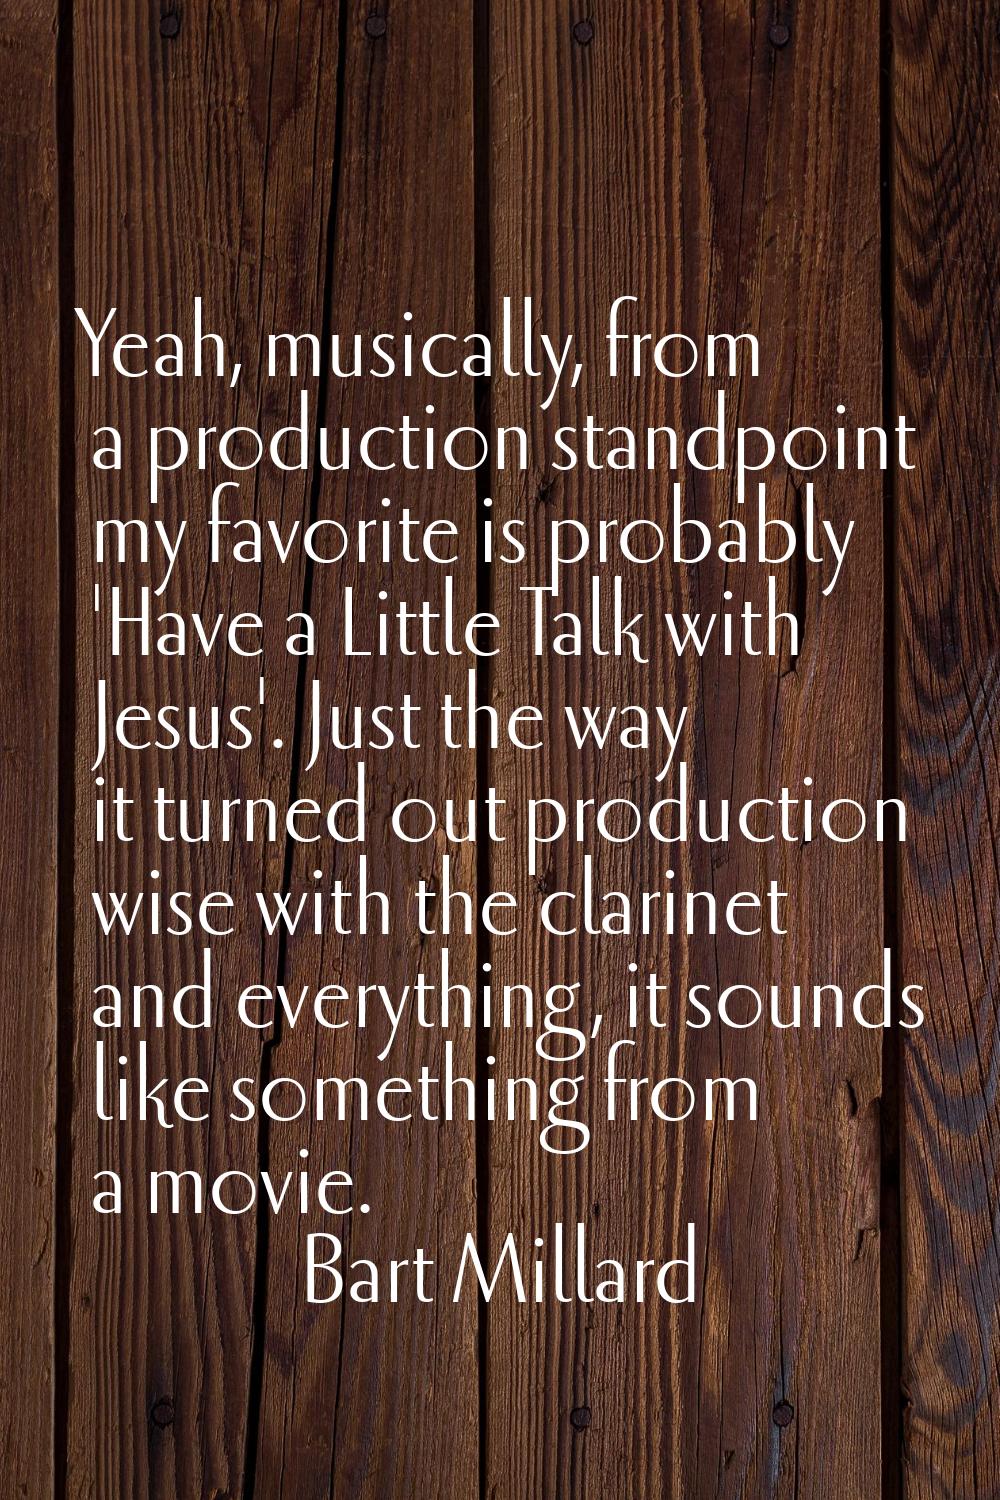 Yeah, musically, from a production standpoint my favorite is probably 'Have a Little Talk with Jesu